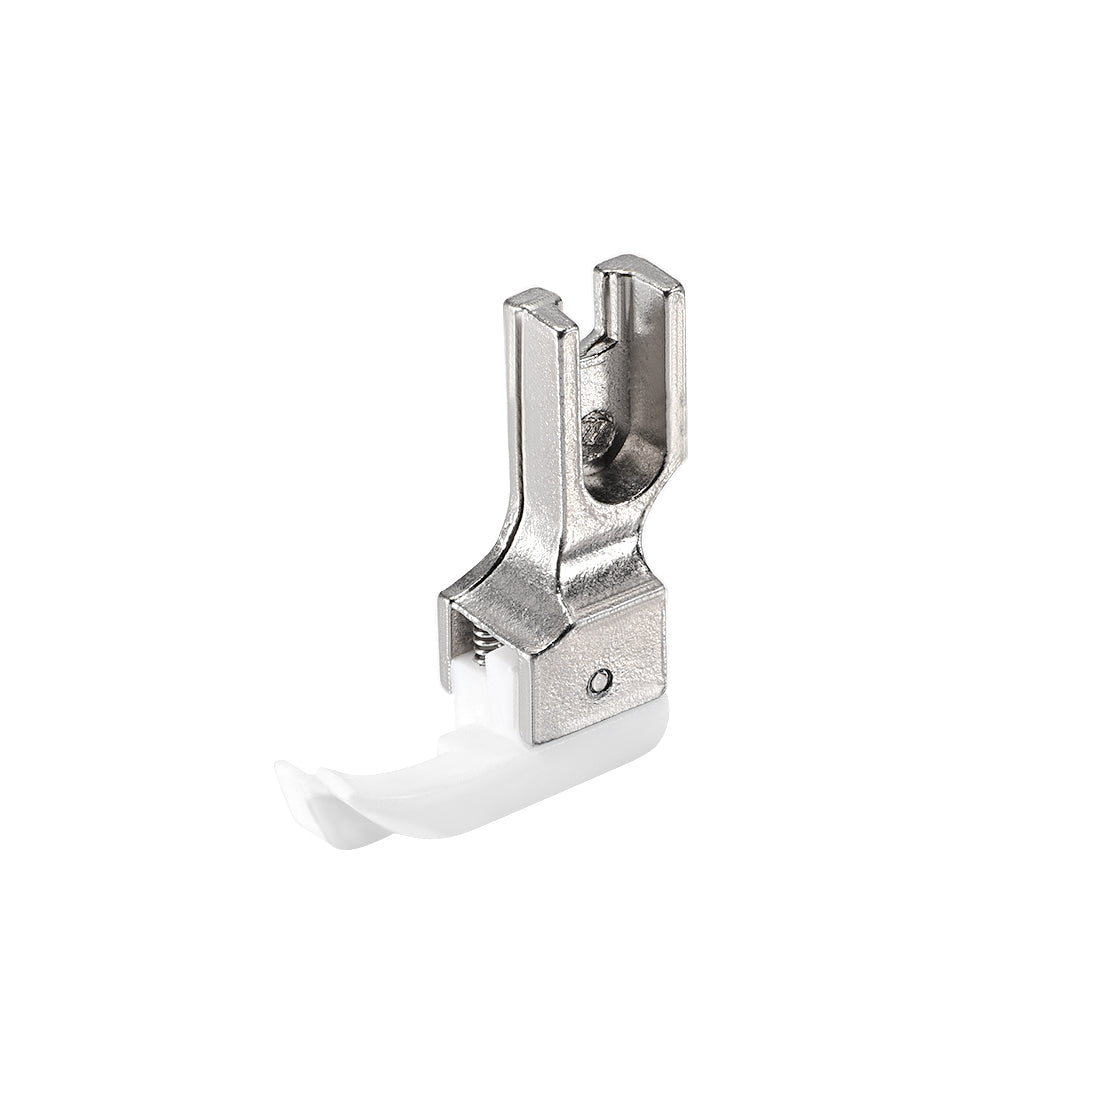 uxcell Uxcell 1/32" Left Side Edge Guide Compensating Presser Foot for Single Needle Industrial Sewing Machines